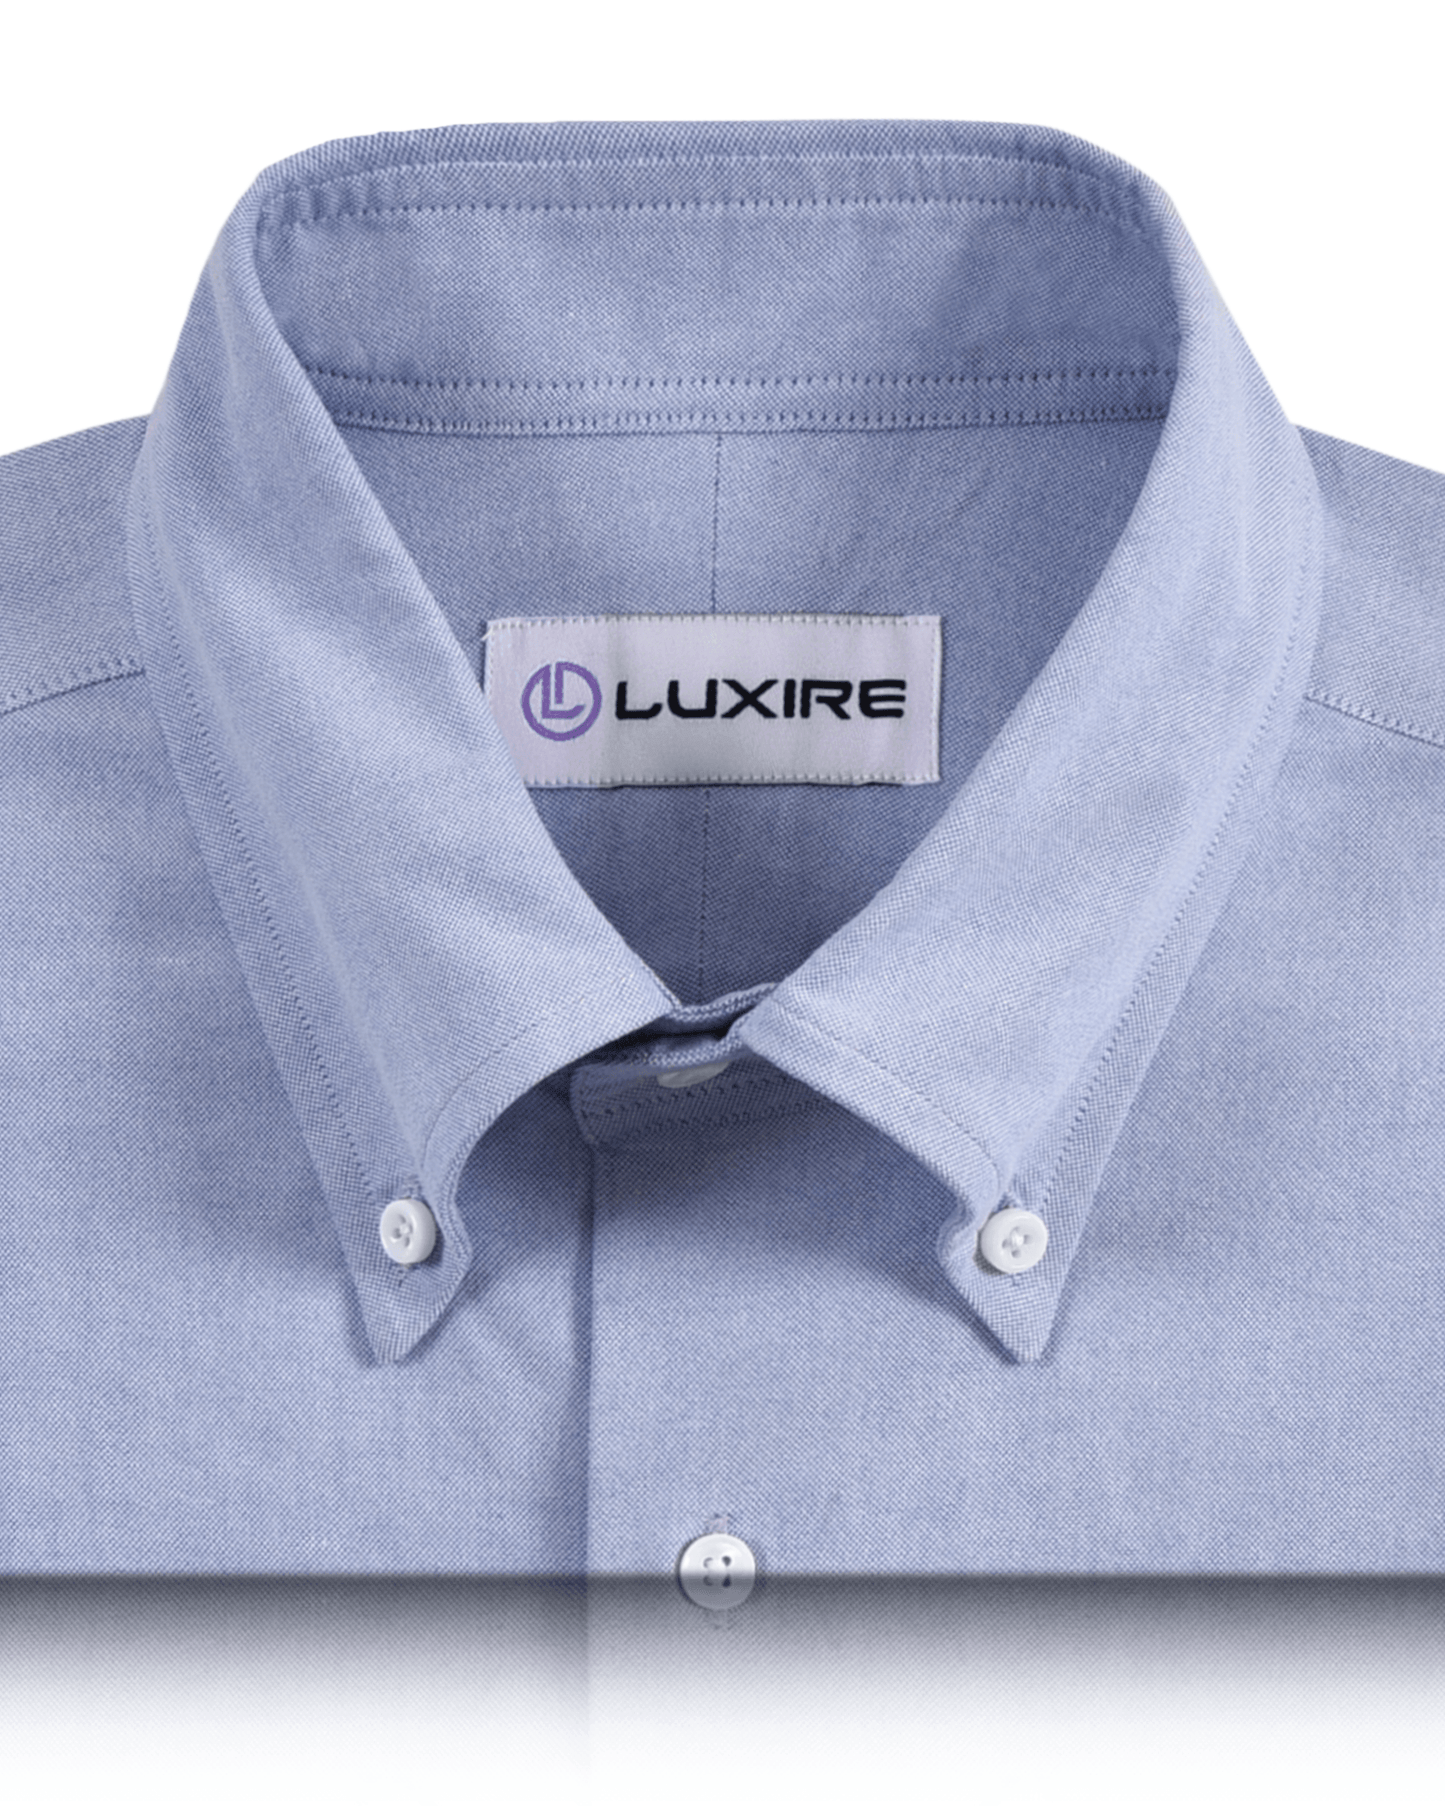 Collar of the custom oxford shirt for men by Luxire in warzone blue